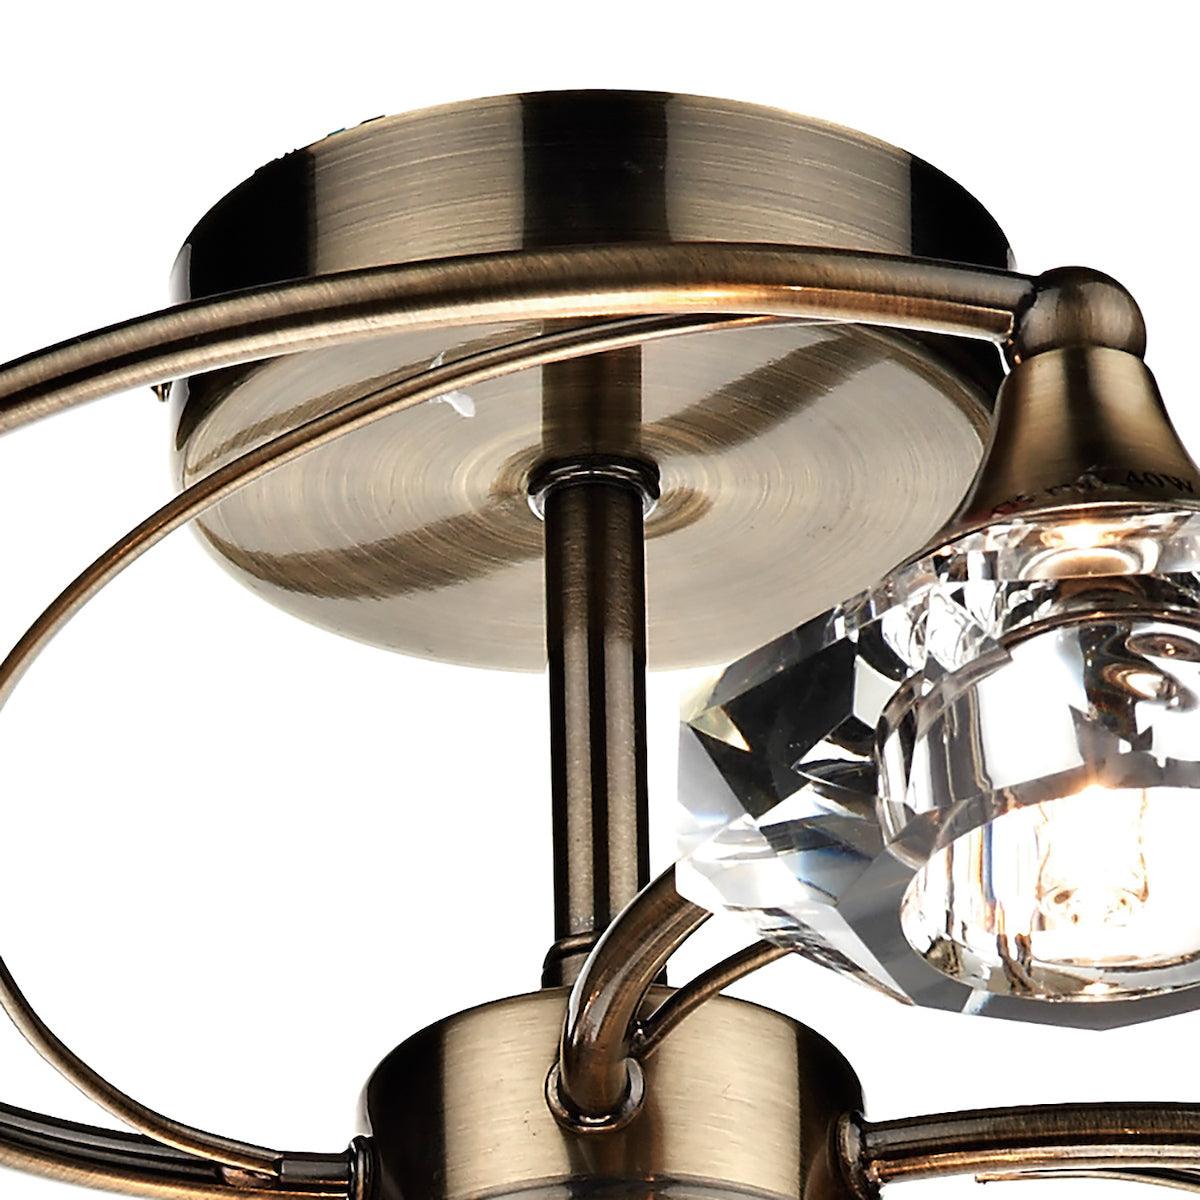 Luther 6 Light Semi Flush complete with Crystal Glass Antique Brass - Peter Murphy Lighting & Electrical Ltd